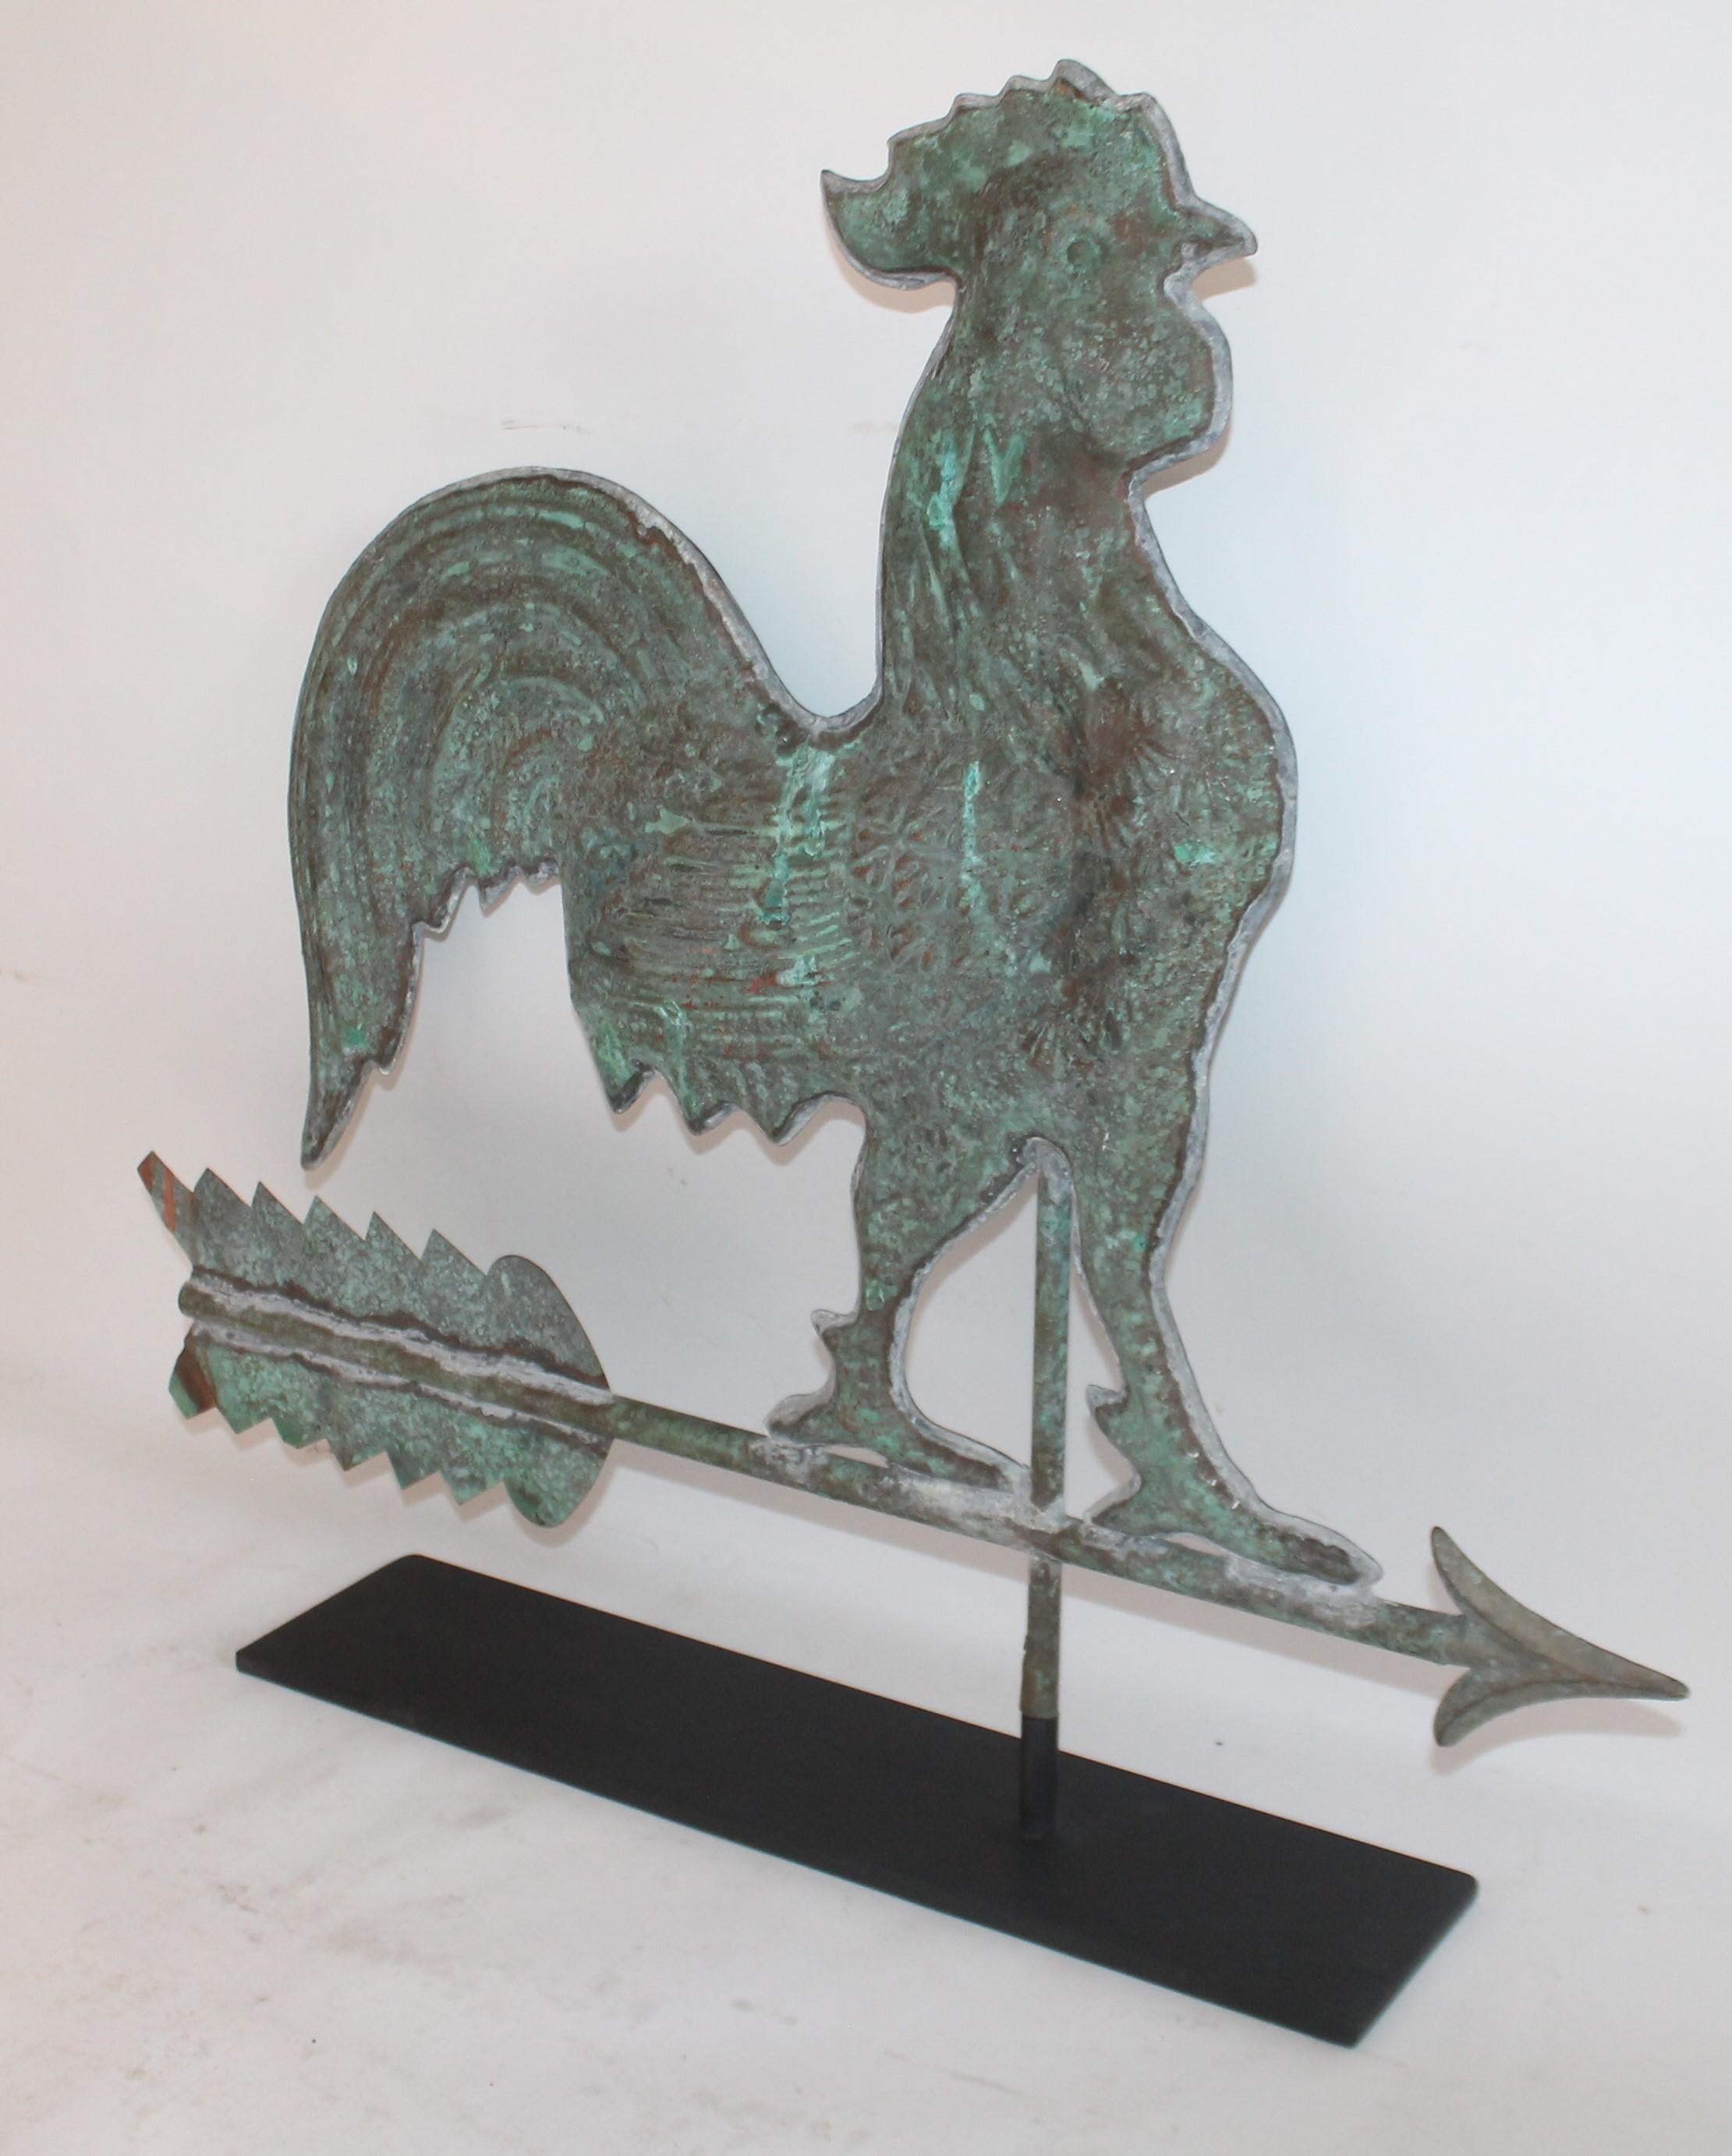 Early 20th century rooster copper full body weather vane with amazing aged patina. This comes with a custom made iron stand. It's from the early 20th century and in good condition with minor dings or small dents.